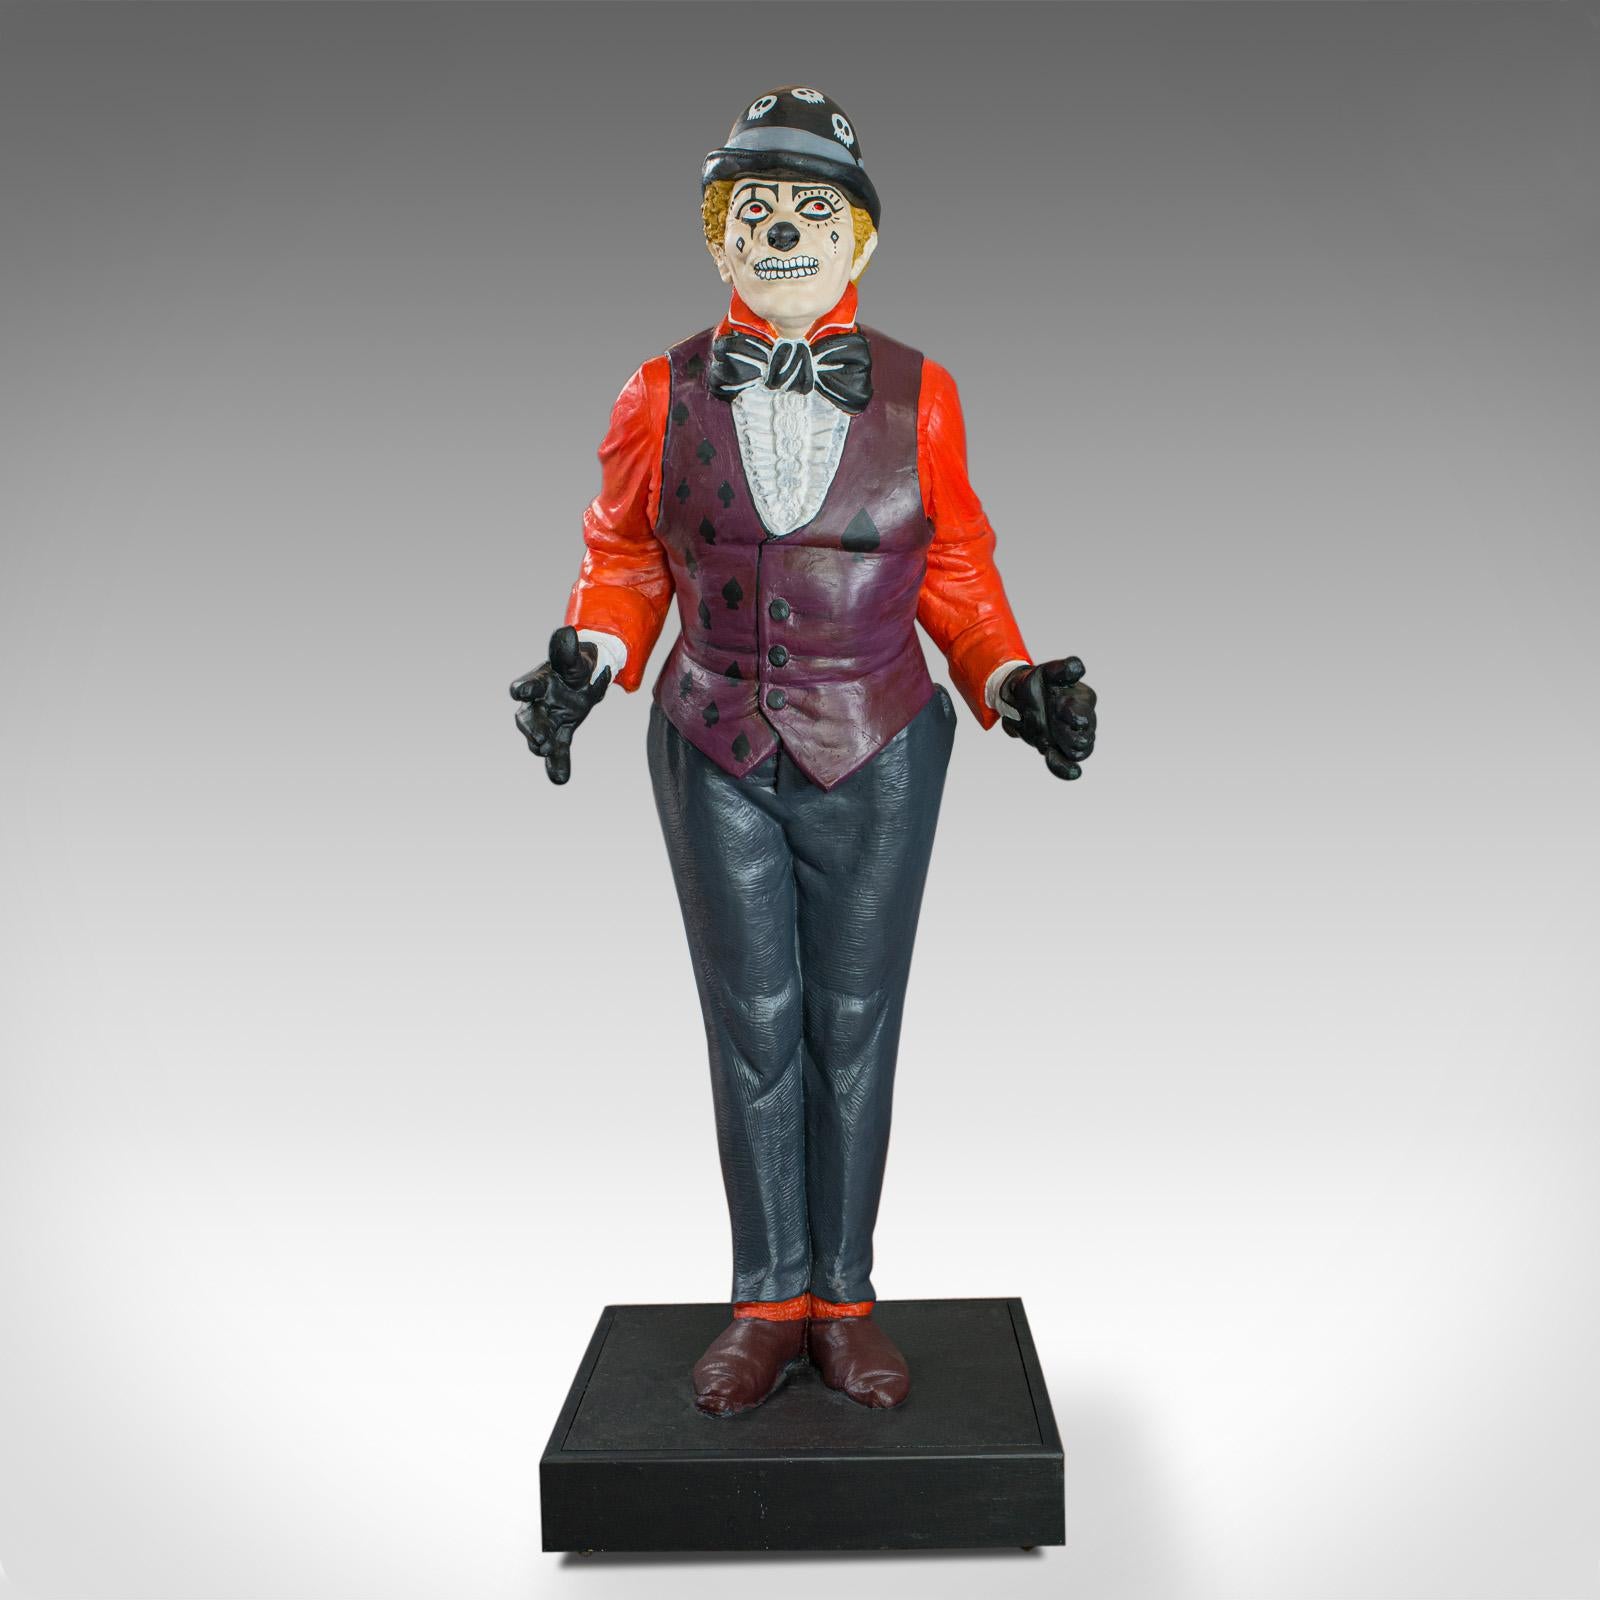 This is a life-size vintage clown statue. English, heavy, solid plaster cast standing figure dating to the mid-20th century, circa 1950.

Standing over 6'2